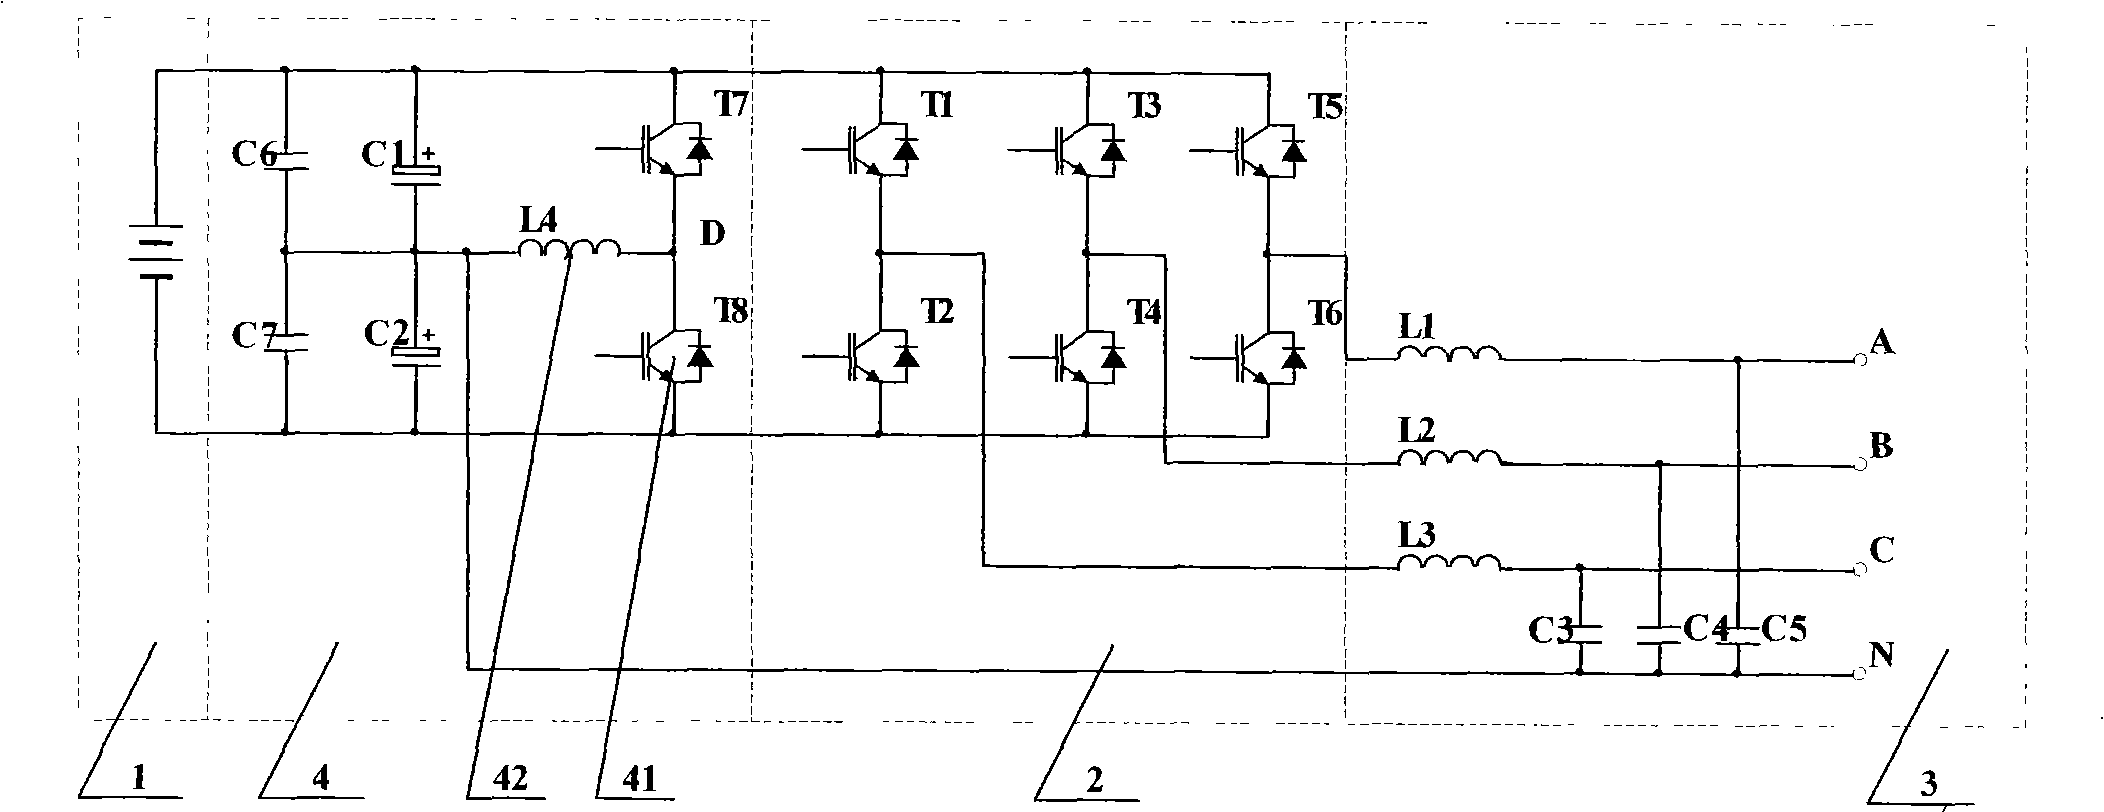 Three-phase four-wire system inverter circuit